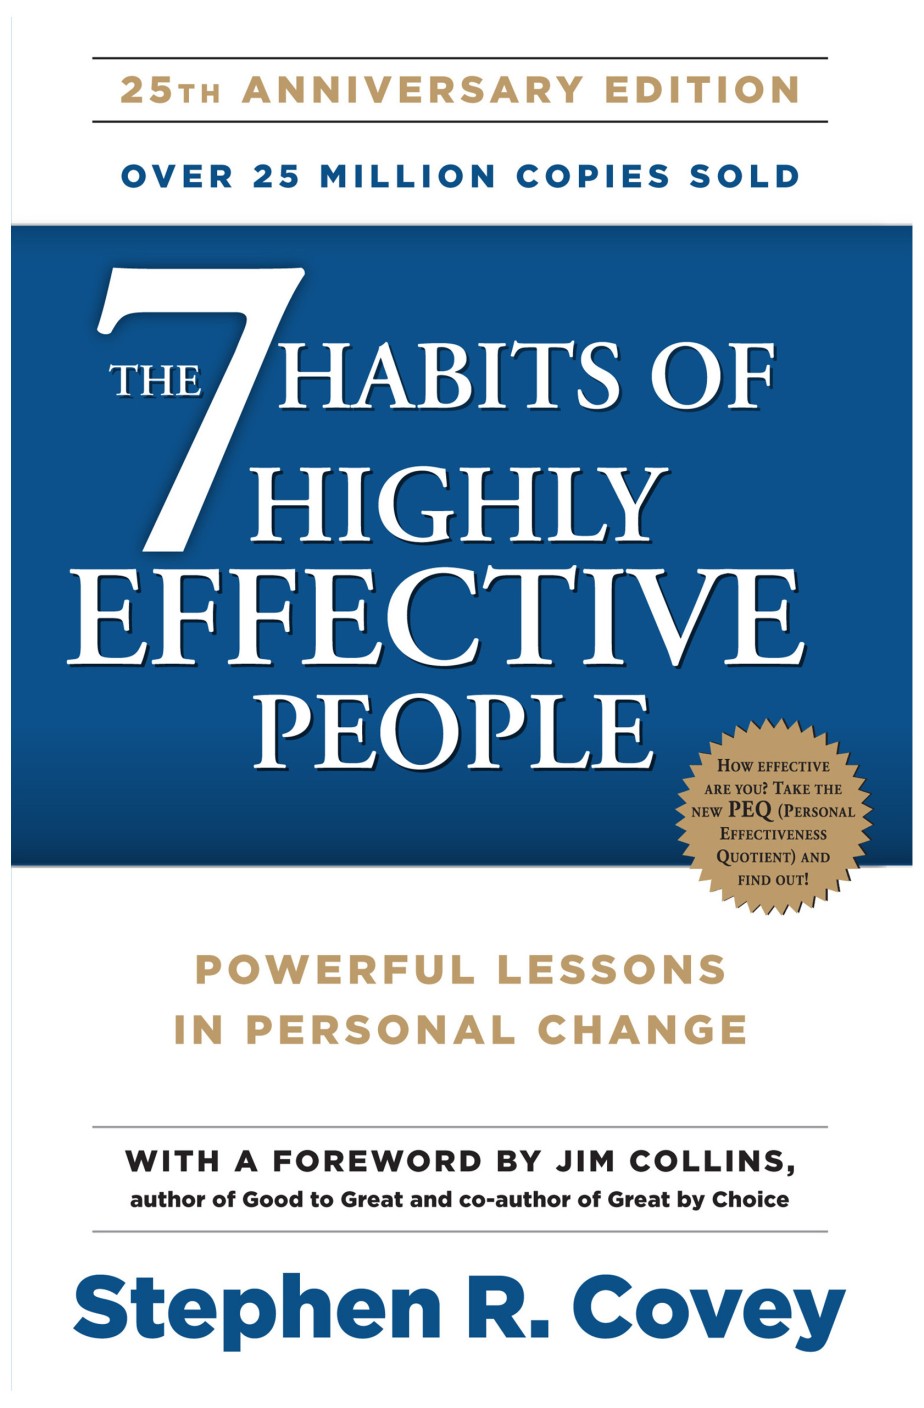 seven habits of highly effective peoples